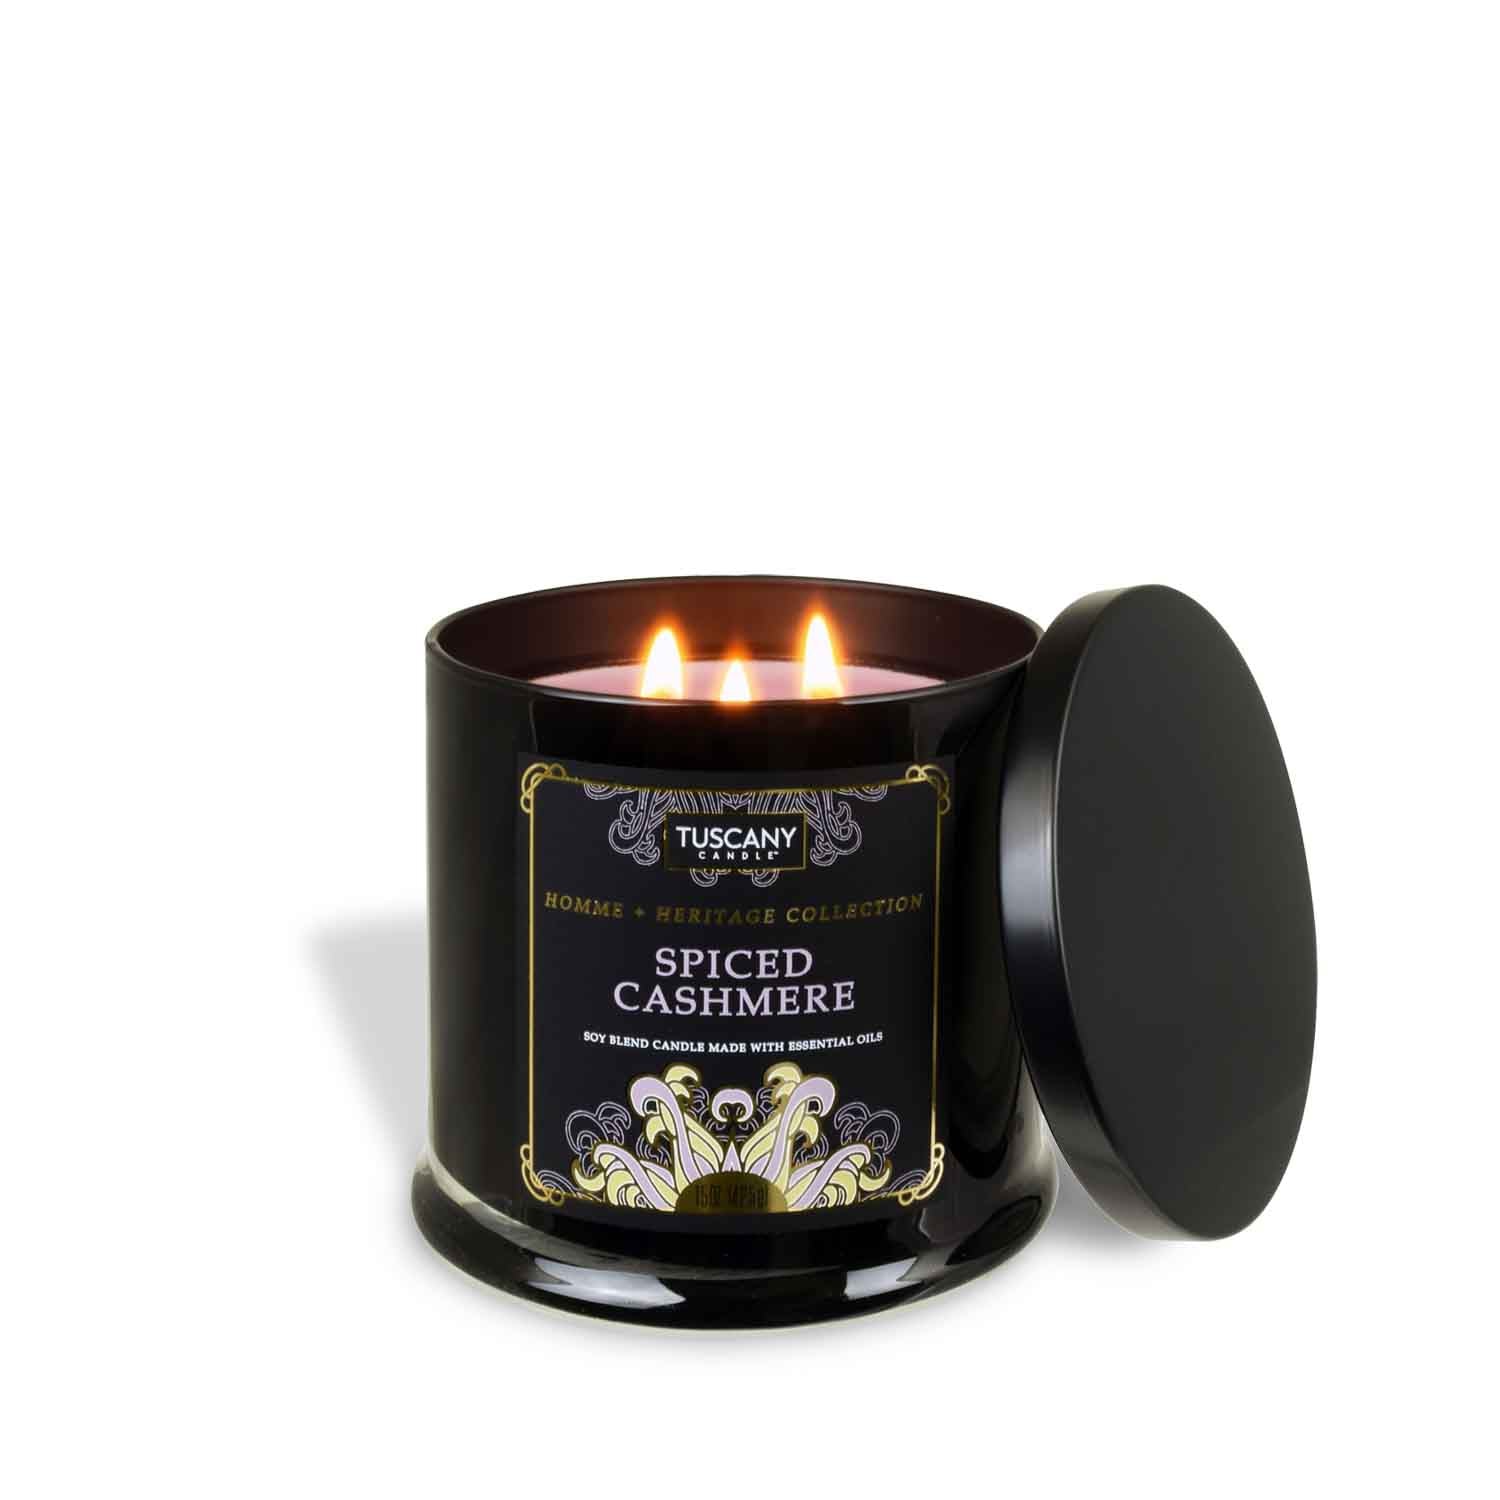 Spiced Cashmere Scented Jar Candle (15 oz) – Homme + Heritage Collecti